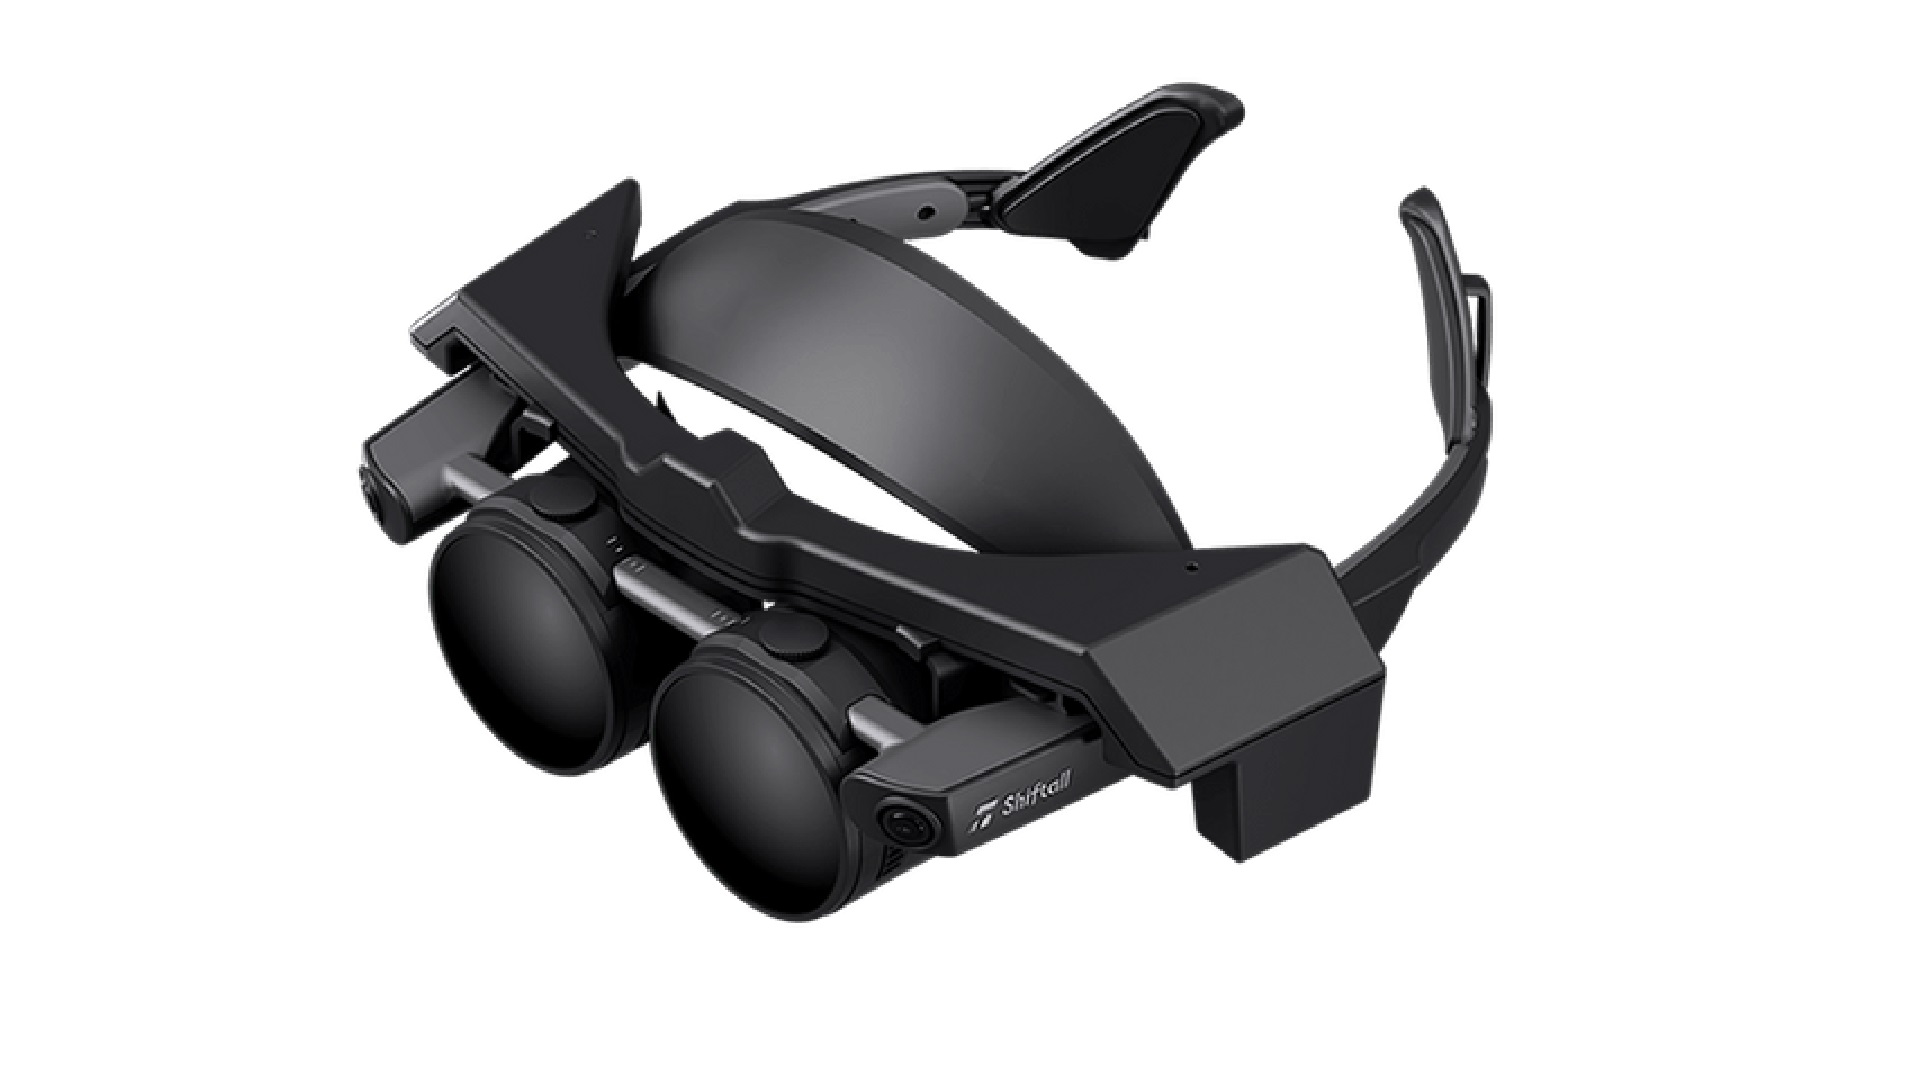 VR Headsets & Accessories: Virtual Reality for Work, Xbox, PC & More -  Microsoft Store